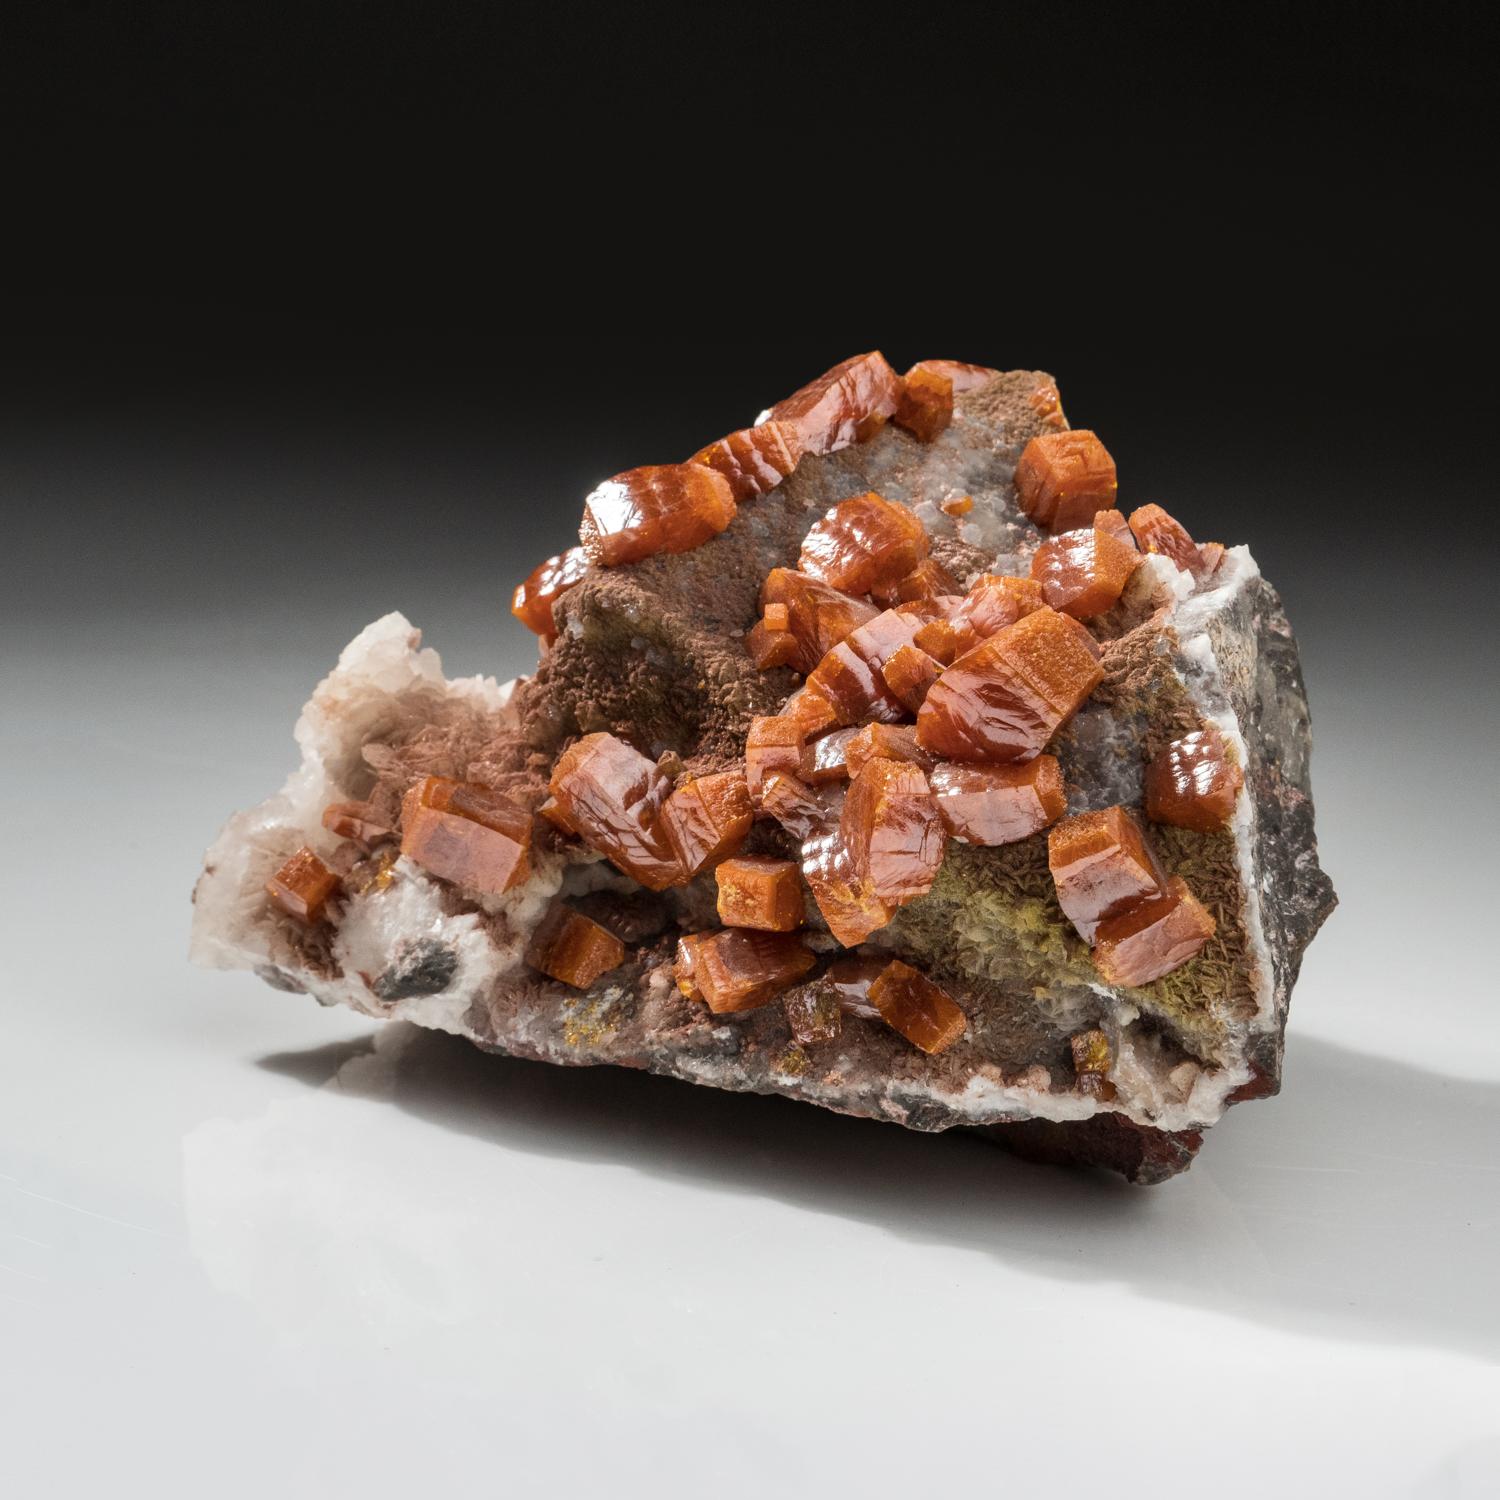 This large cluster of butterscotch Wulfinite cubic crystals on matrix was discovered in the Ahumada Mine, Sierra Los Lamentos, Chihuahua, Mexico. These rare, Wulfenite specimens have been a prize choice for collectors for many decades. These